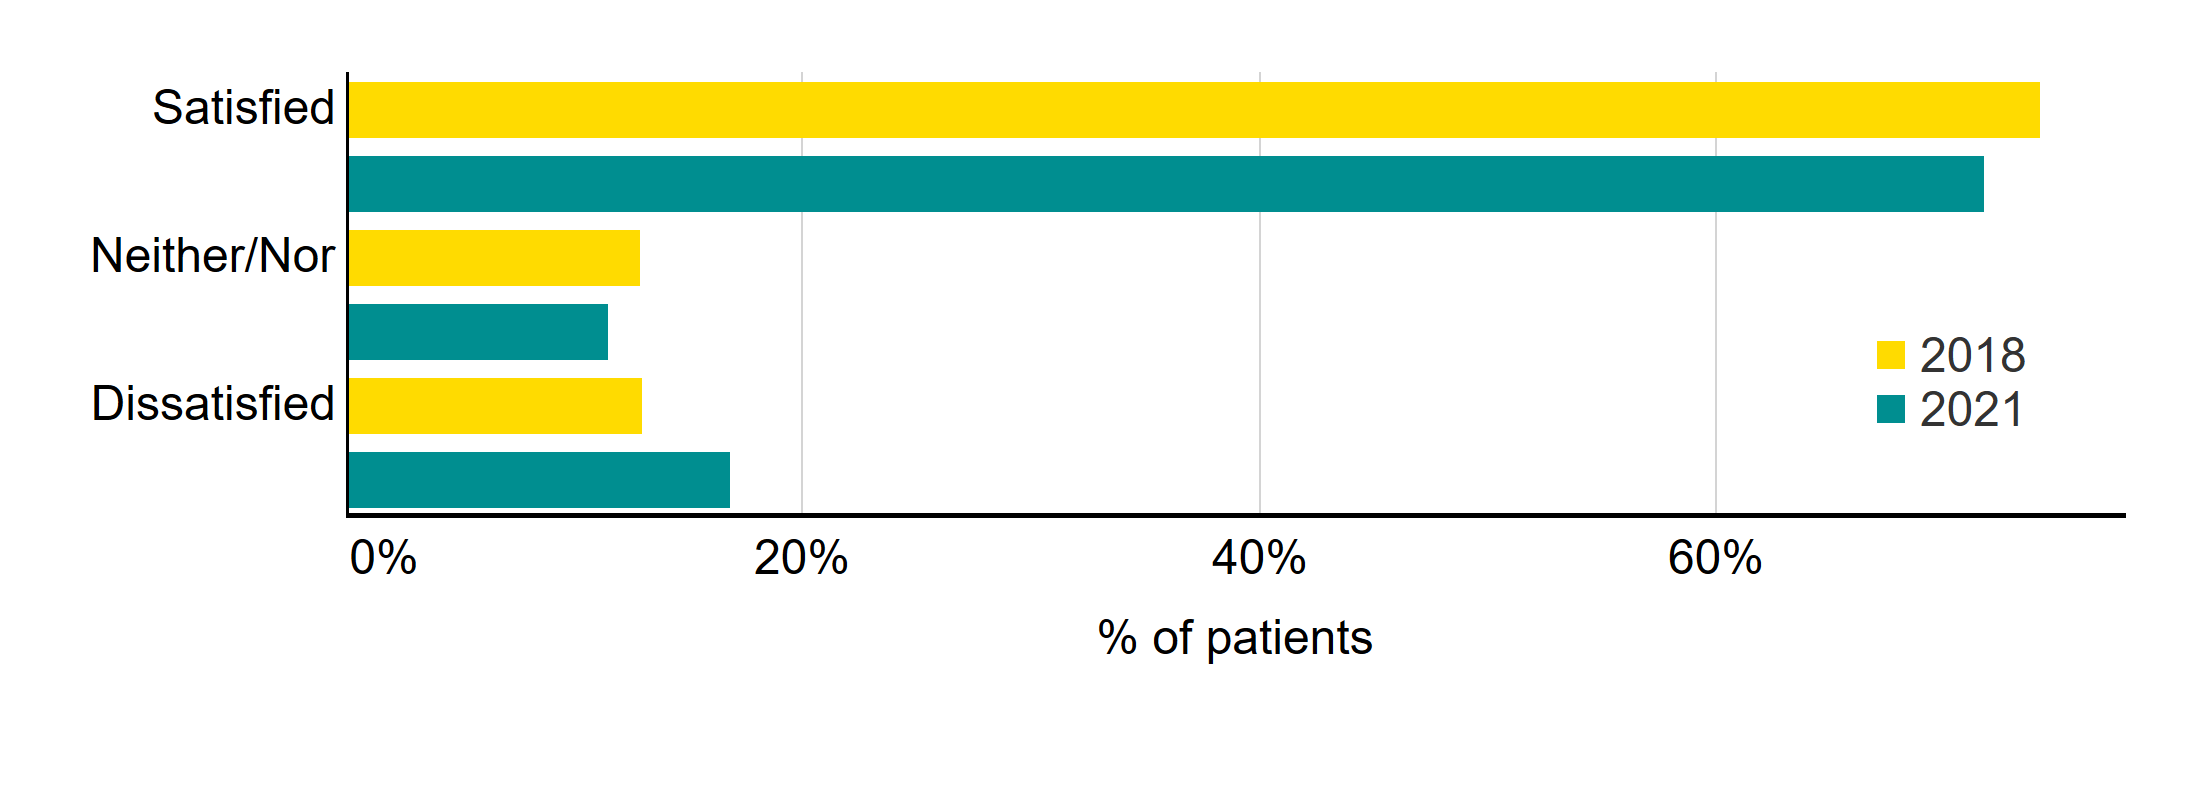 Figure 1: Overall satisfaction with recent treatment, 2018 vs. 2021. Overall satisfaction with recent treatment, 2018 vs. 2021. This bar chart shows whether patients were satisfied, dissatisfied, or neither, with their most recent treatment, comparing results from the 2018 and 2021 Patient Surveys. Patients were more likely to be satisfied with their most recent treatment (72% in 2021), however overall satisfaction has decreased since 2018. An accessible form of the underlying data for this figure can be downloaded at the start of the report in .xls format.